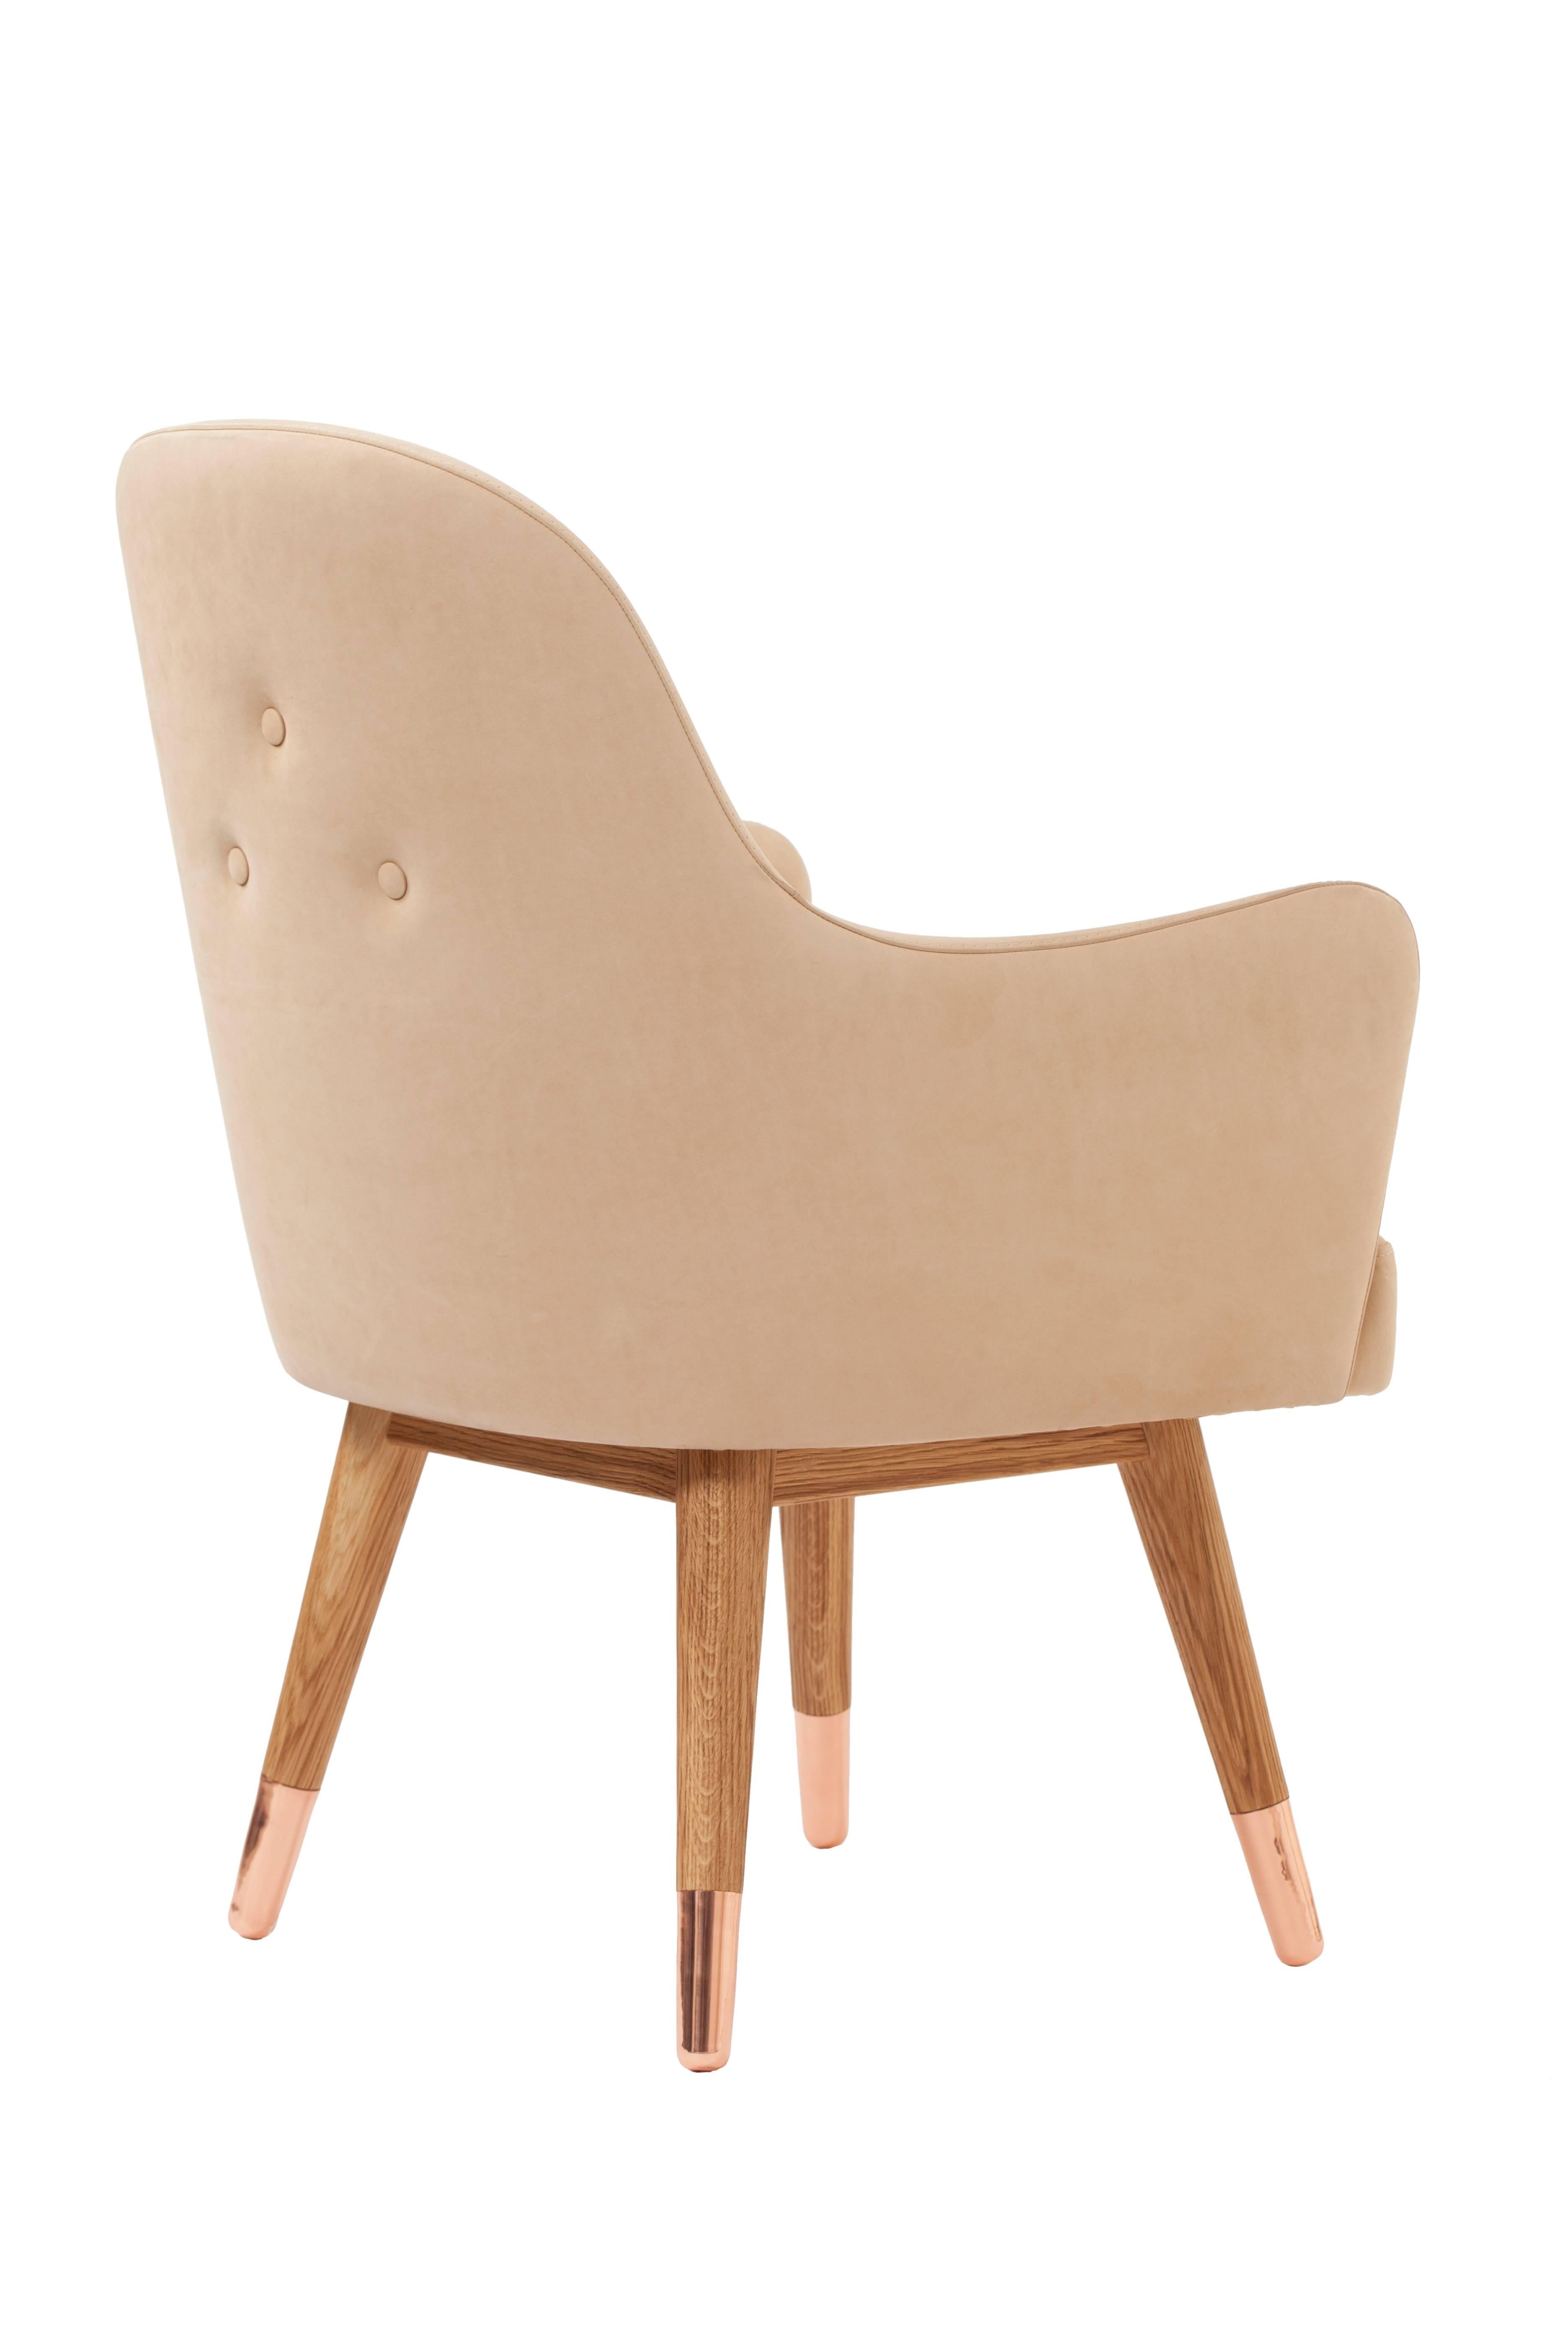 Polished Dandy Chair Armchair in Soft Suede Beige Leather, White Oak and Copper For Sale